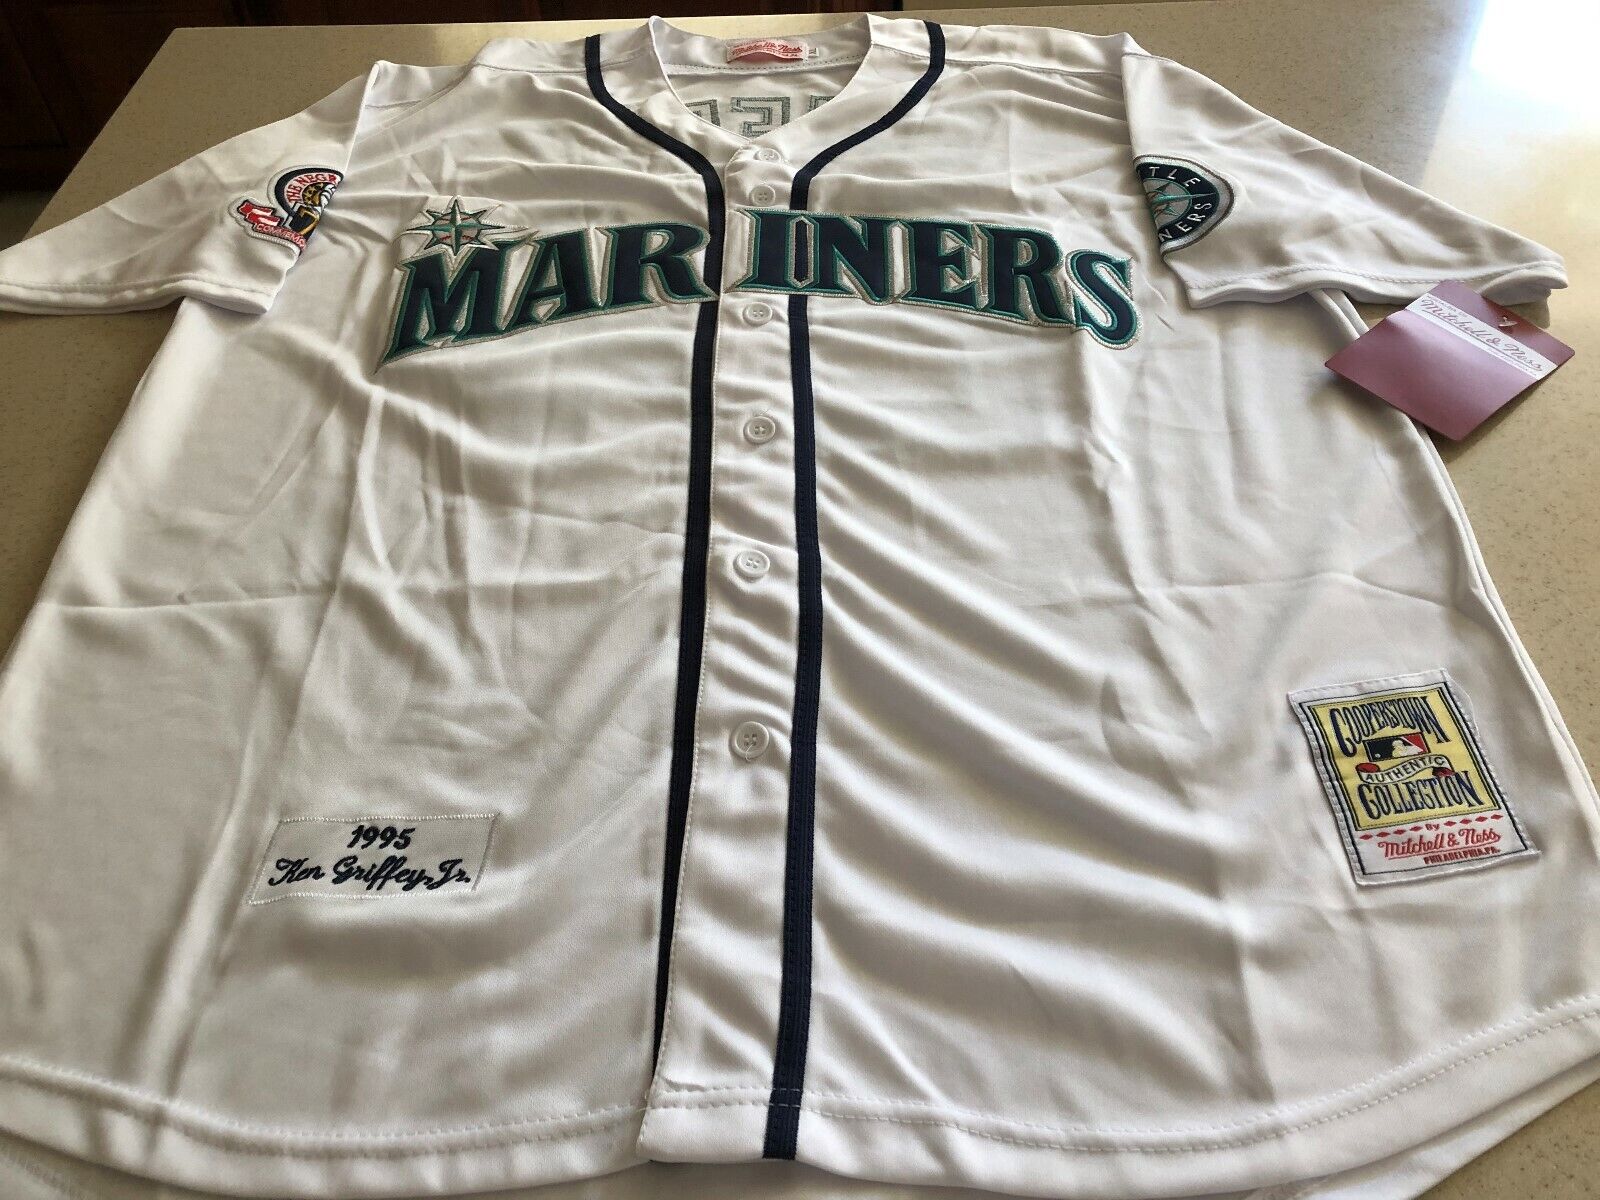 ken griffey jr mariners jersey mitchell and ness